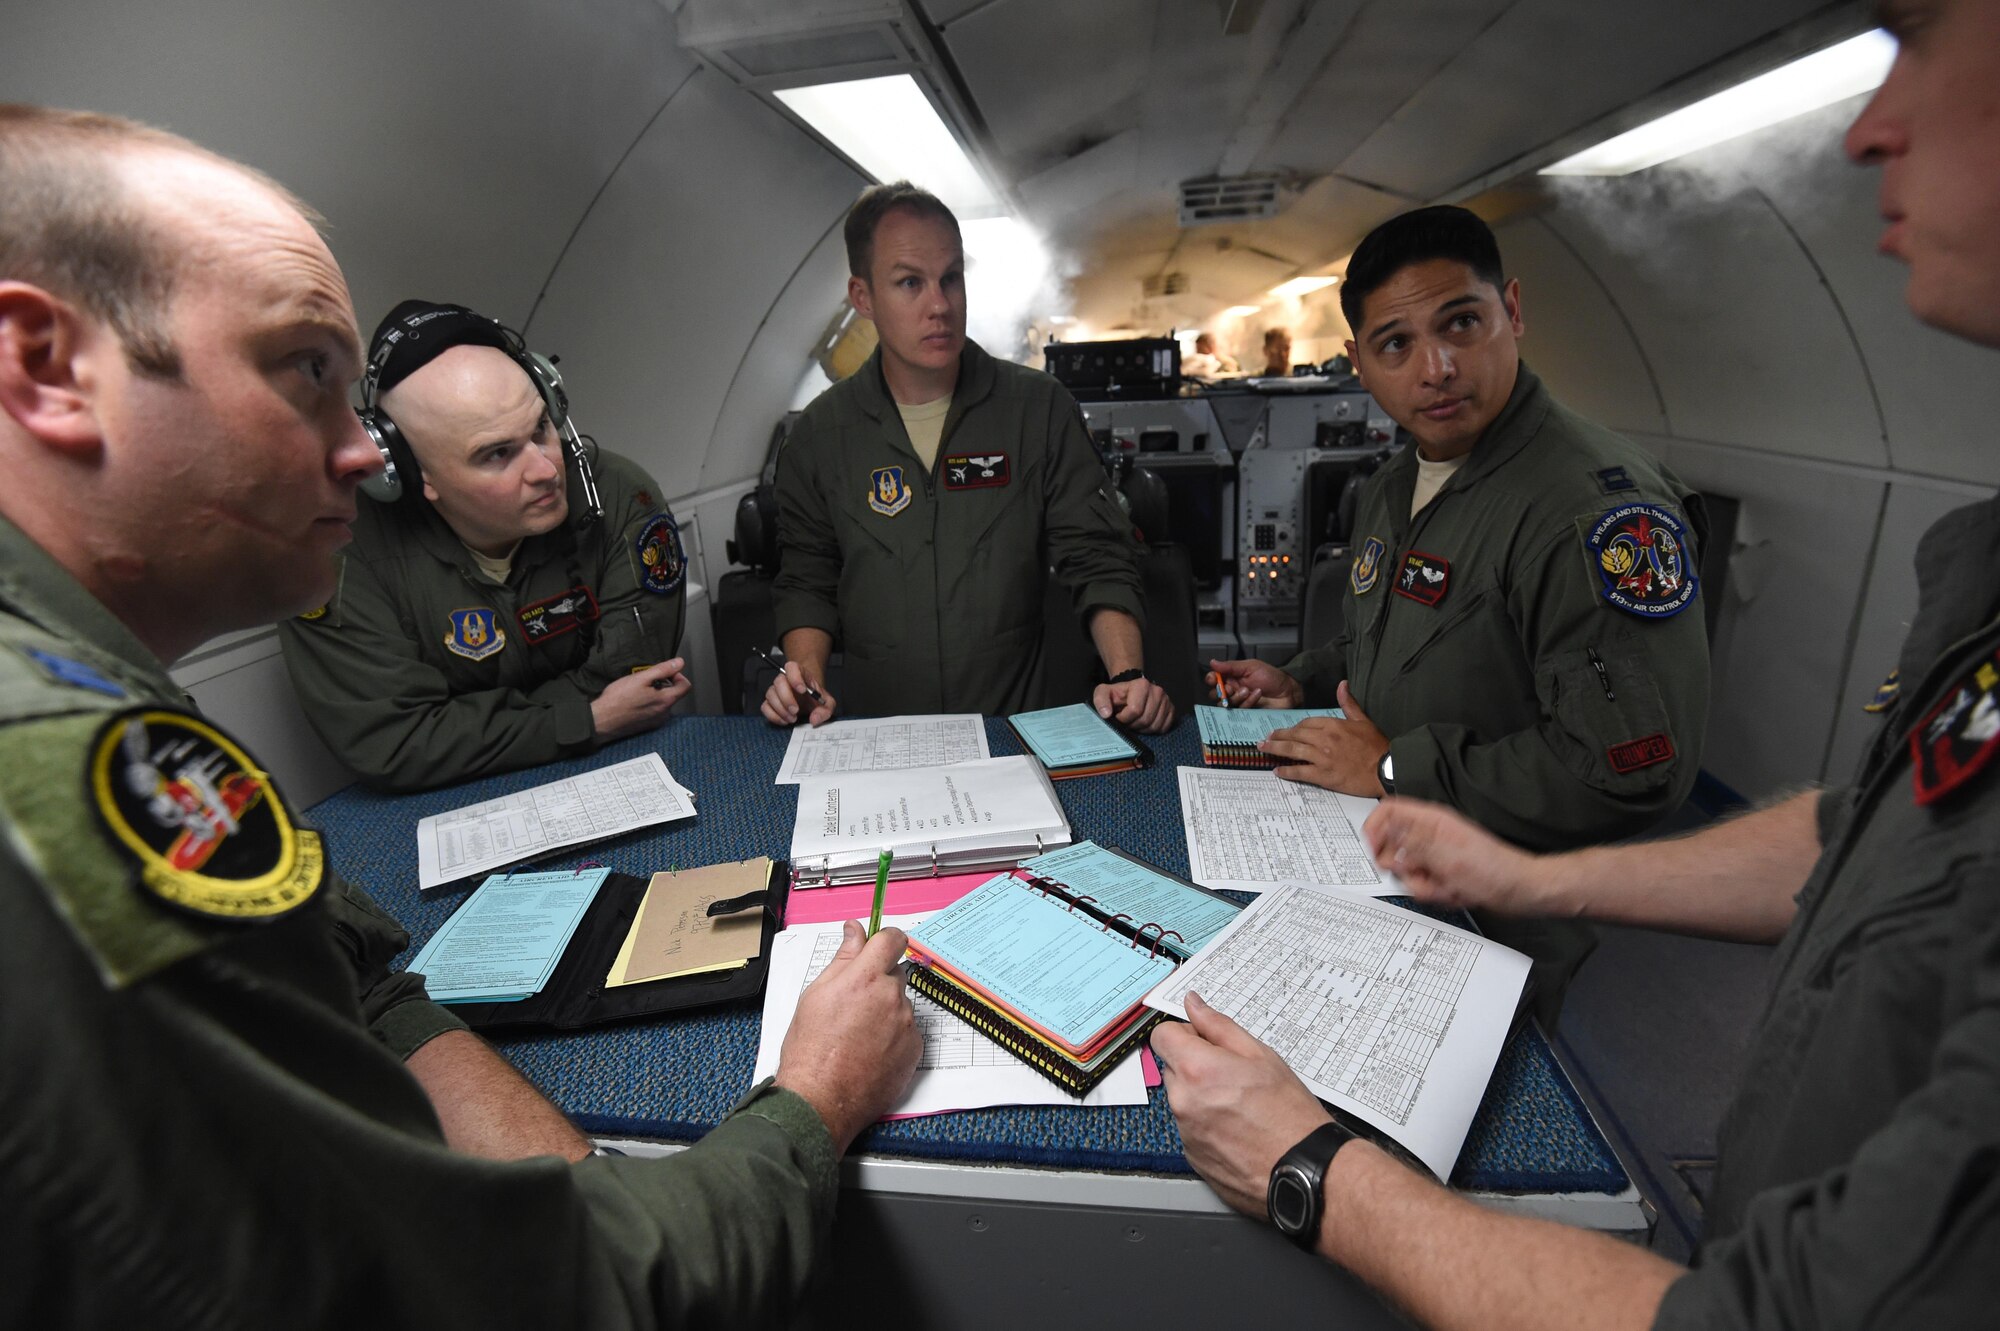 Air battle managers assigned to the 970th Airborne Air Control Squadron discuss mission details on July 23, 2016, aboard an E-3 Sentry at Joint Base Pearl Harbor-Hickam, Hawaii, prior to a mission in support of Rim of the Pacific 2016. More than 125 Airmen from the 513th Air Control Group and 552nd Air Control Wing are deployed to Hawaii in support of the RIMPAC 2016 exercise. Twenty-six nations, more than 40 ships and submarines, more than 200 aircraft and 25,000 personnel are participating in RIMPAC from June 30 to Aug. 4, in and around the Hawaiian Islands and Southern California. The world's largest international maritime exercise, RIMPAC provides a unique training opportunity that helps participants foster and sustain the cooperative relationships that are critical to ensuring the safety of sea lanes and security on the world's oceans. RIMPAC 2016 is the 25th exercise in the series that began in 1971. (U.S. Air Force photo by 2nd Lt. Caleb Wanzer)